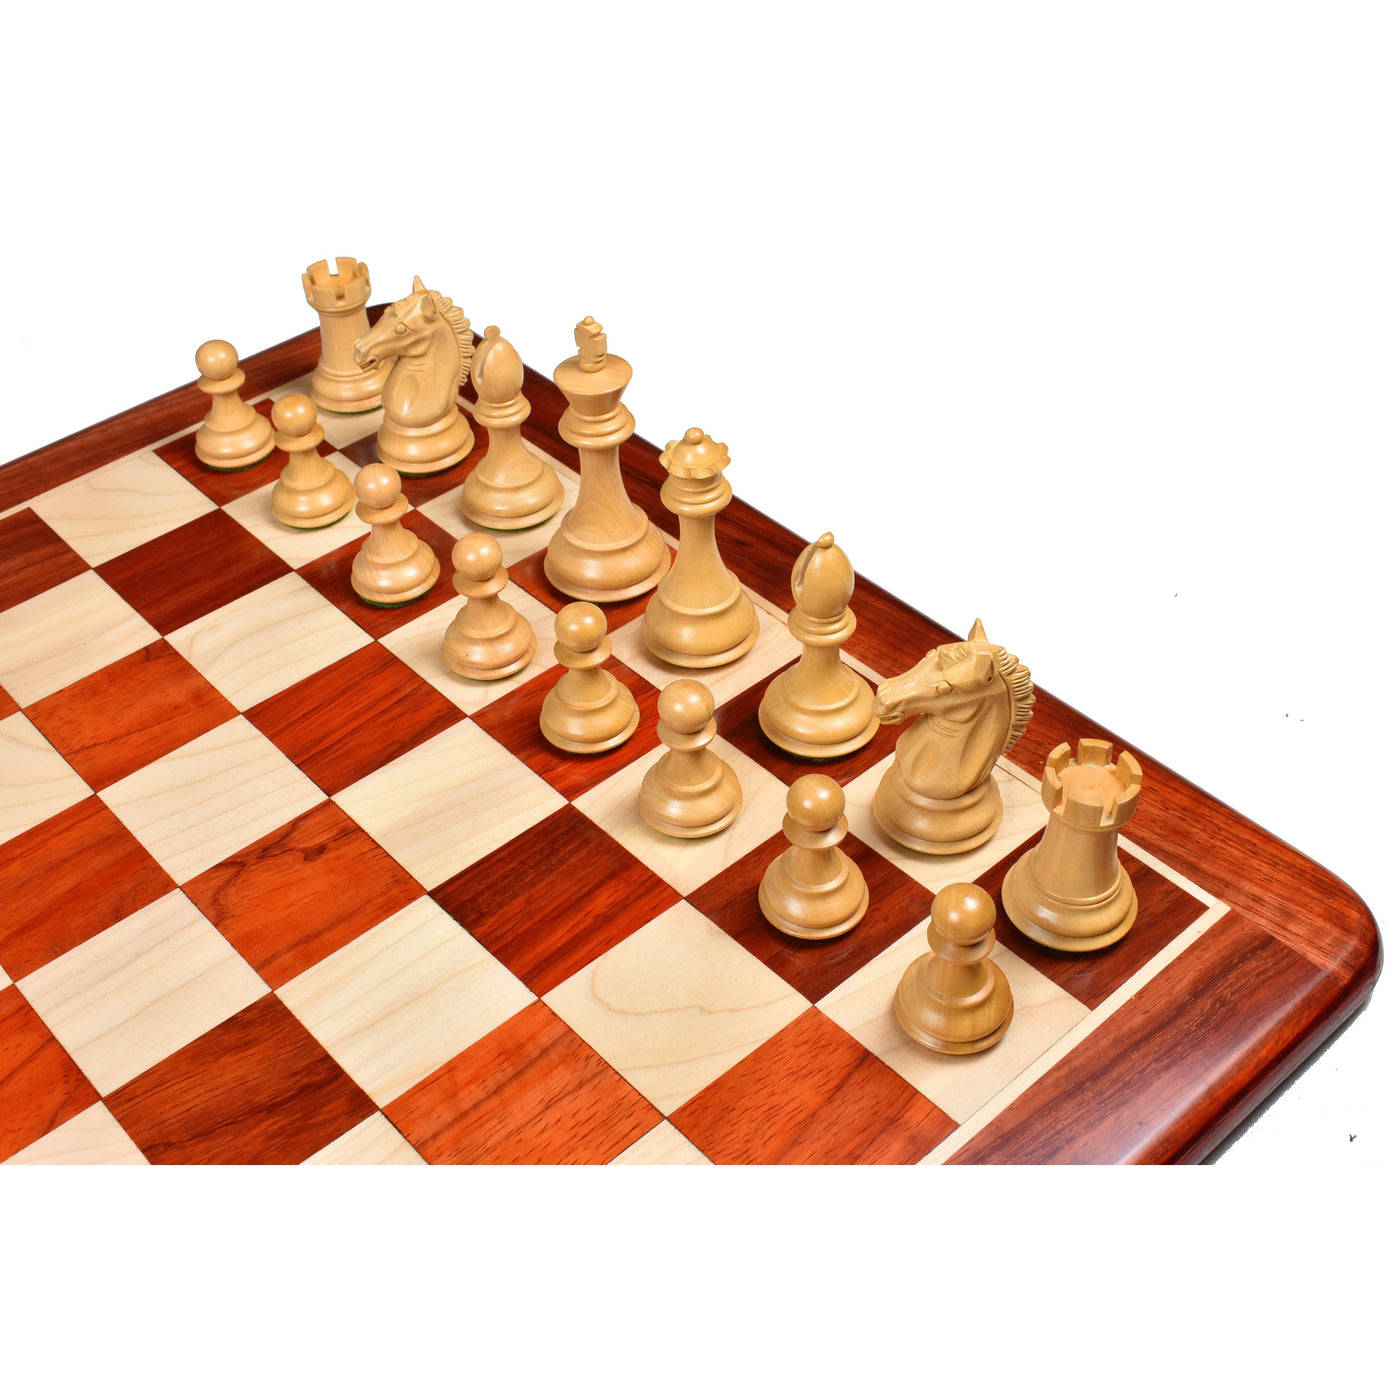 Exclusive Alban Staunton Bud Rose Wood Chess Pieces with 21" Bud Rosewood & Maple Wood Chess board and Book Style Storage Box